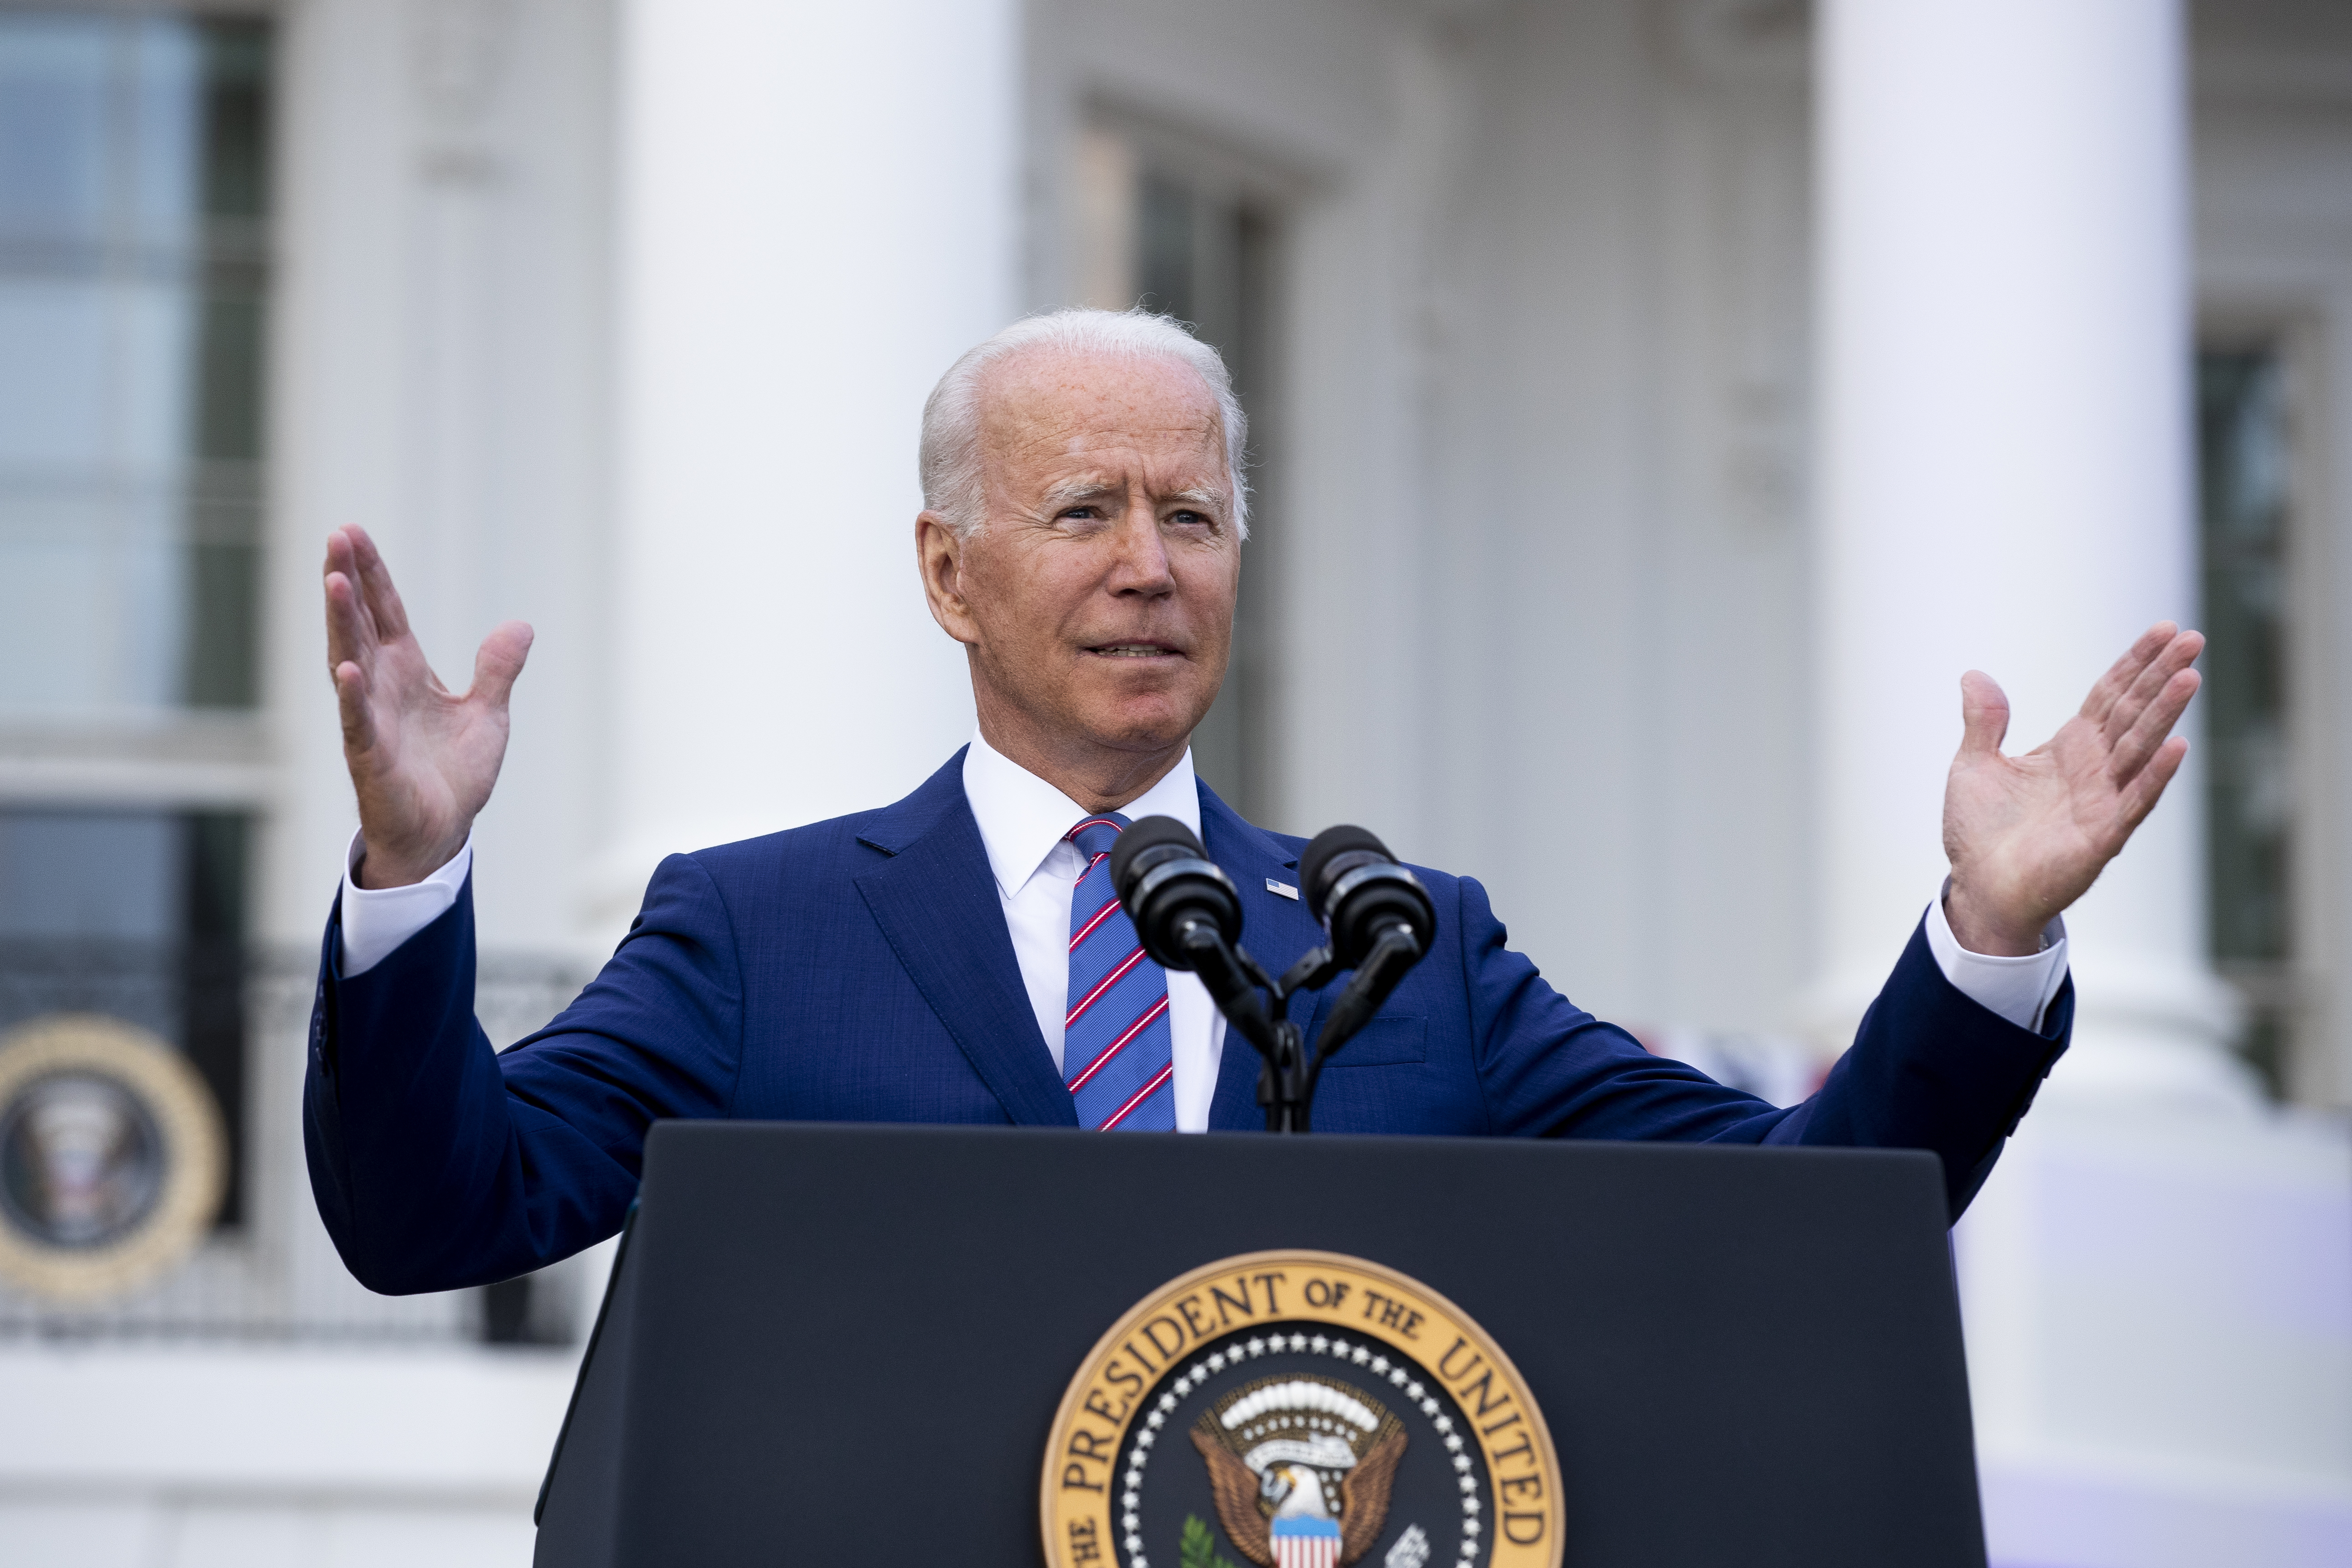 During his July 4 address, Biden branded getting vaccinated as the 'most patriotic thing' you can do